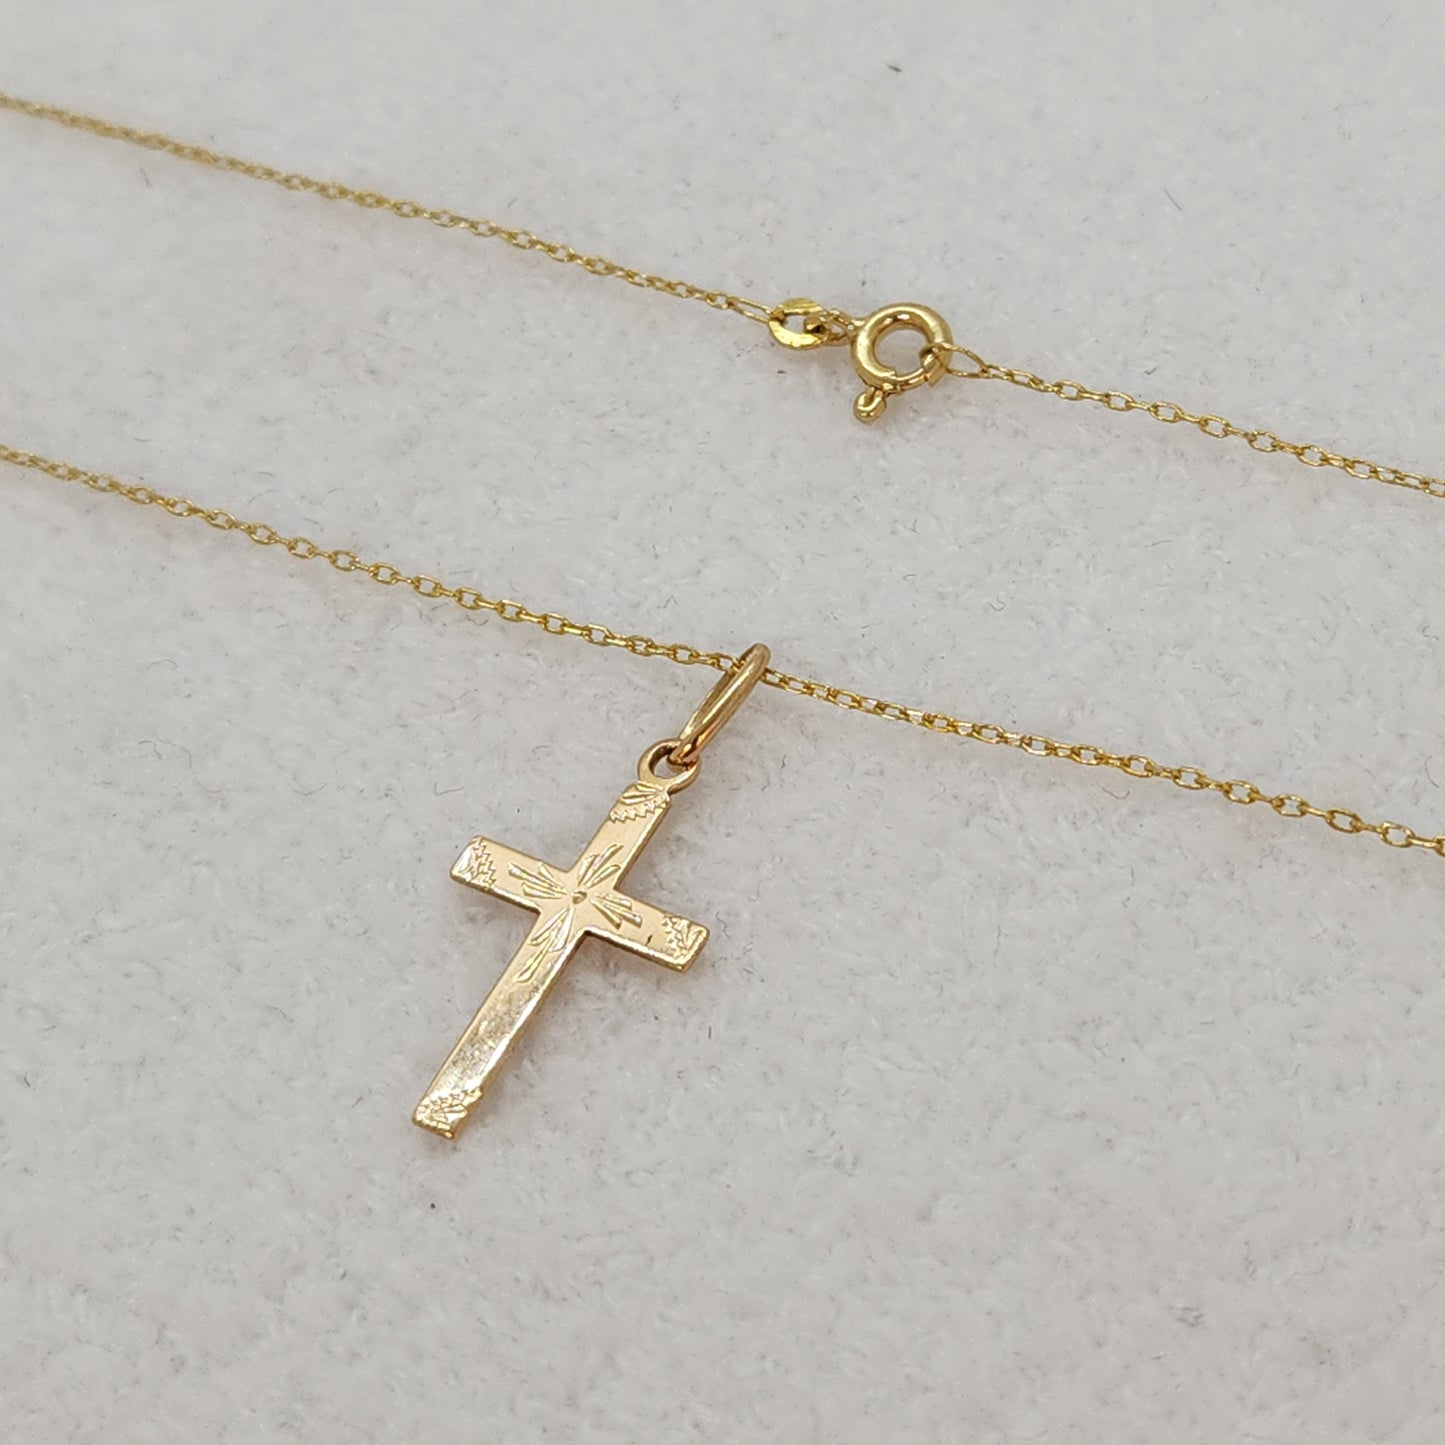 Gold Cross with Hand Engraving